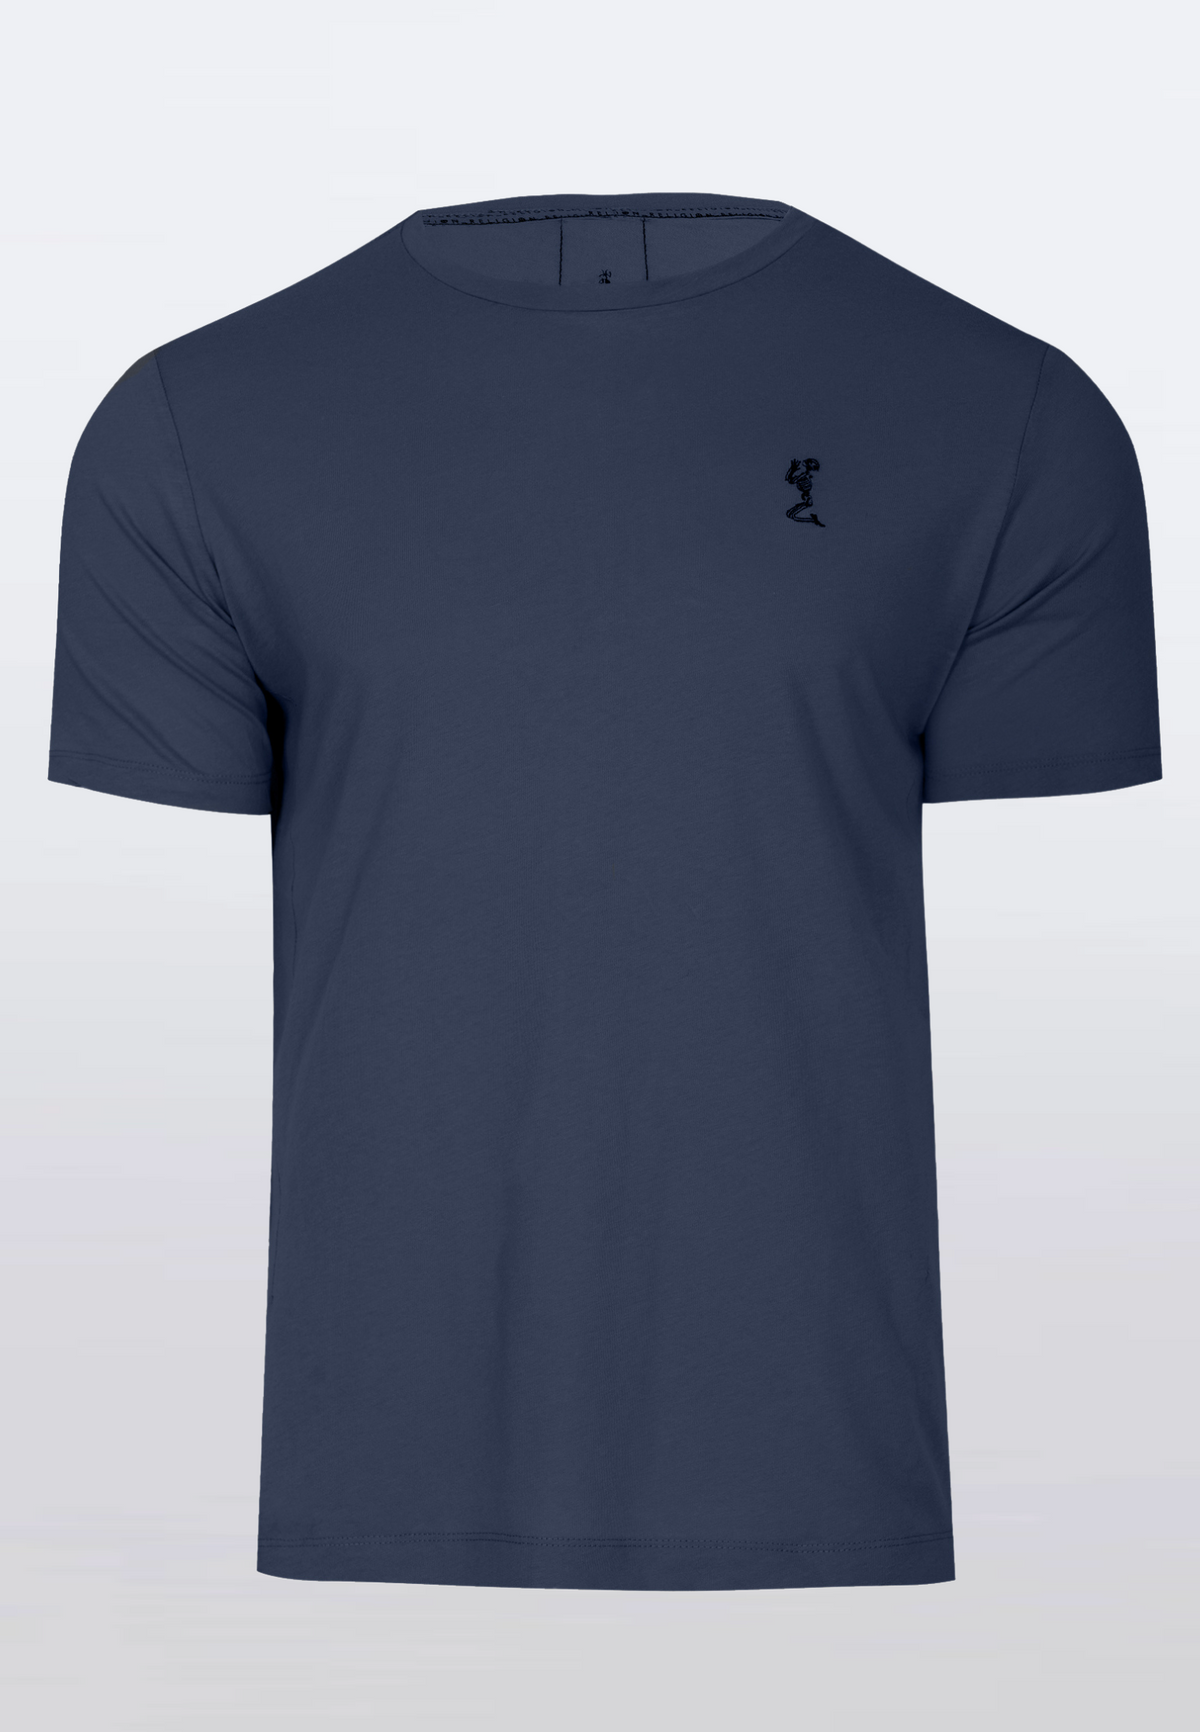 ESSENTIAL CORE NAVY T-SHIRT